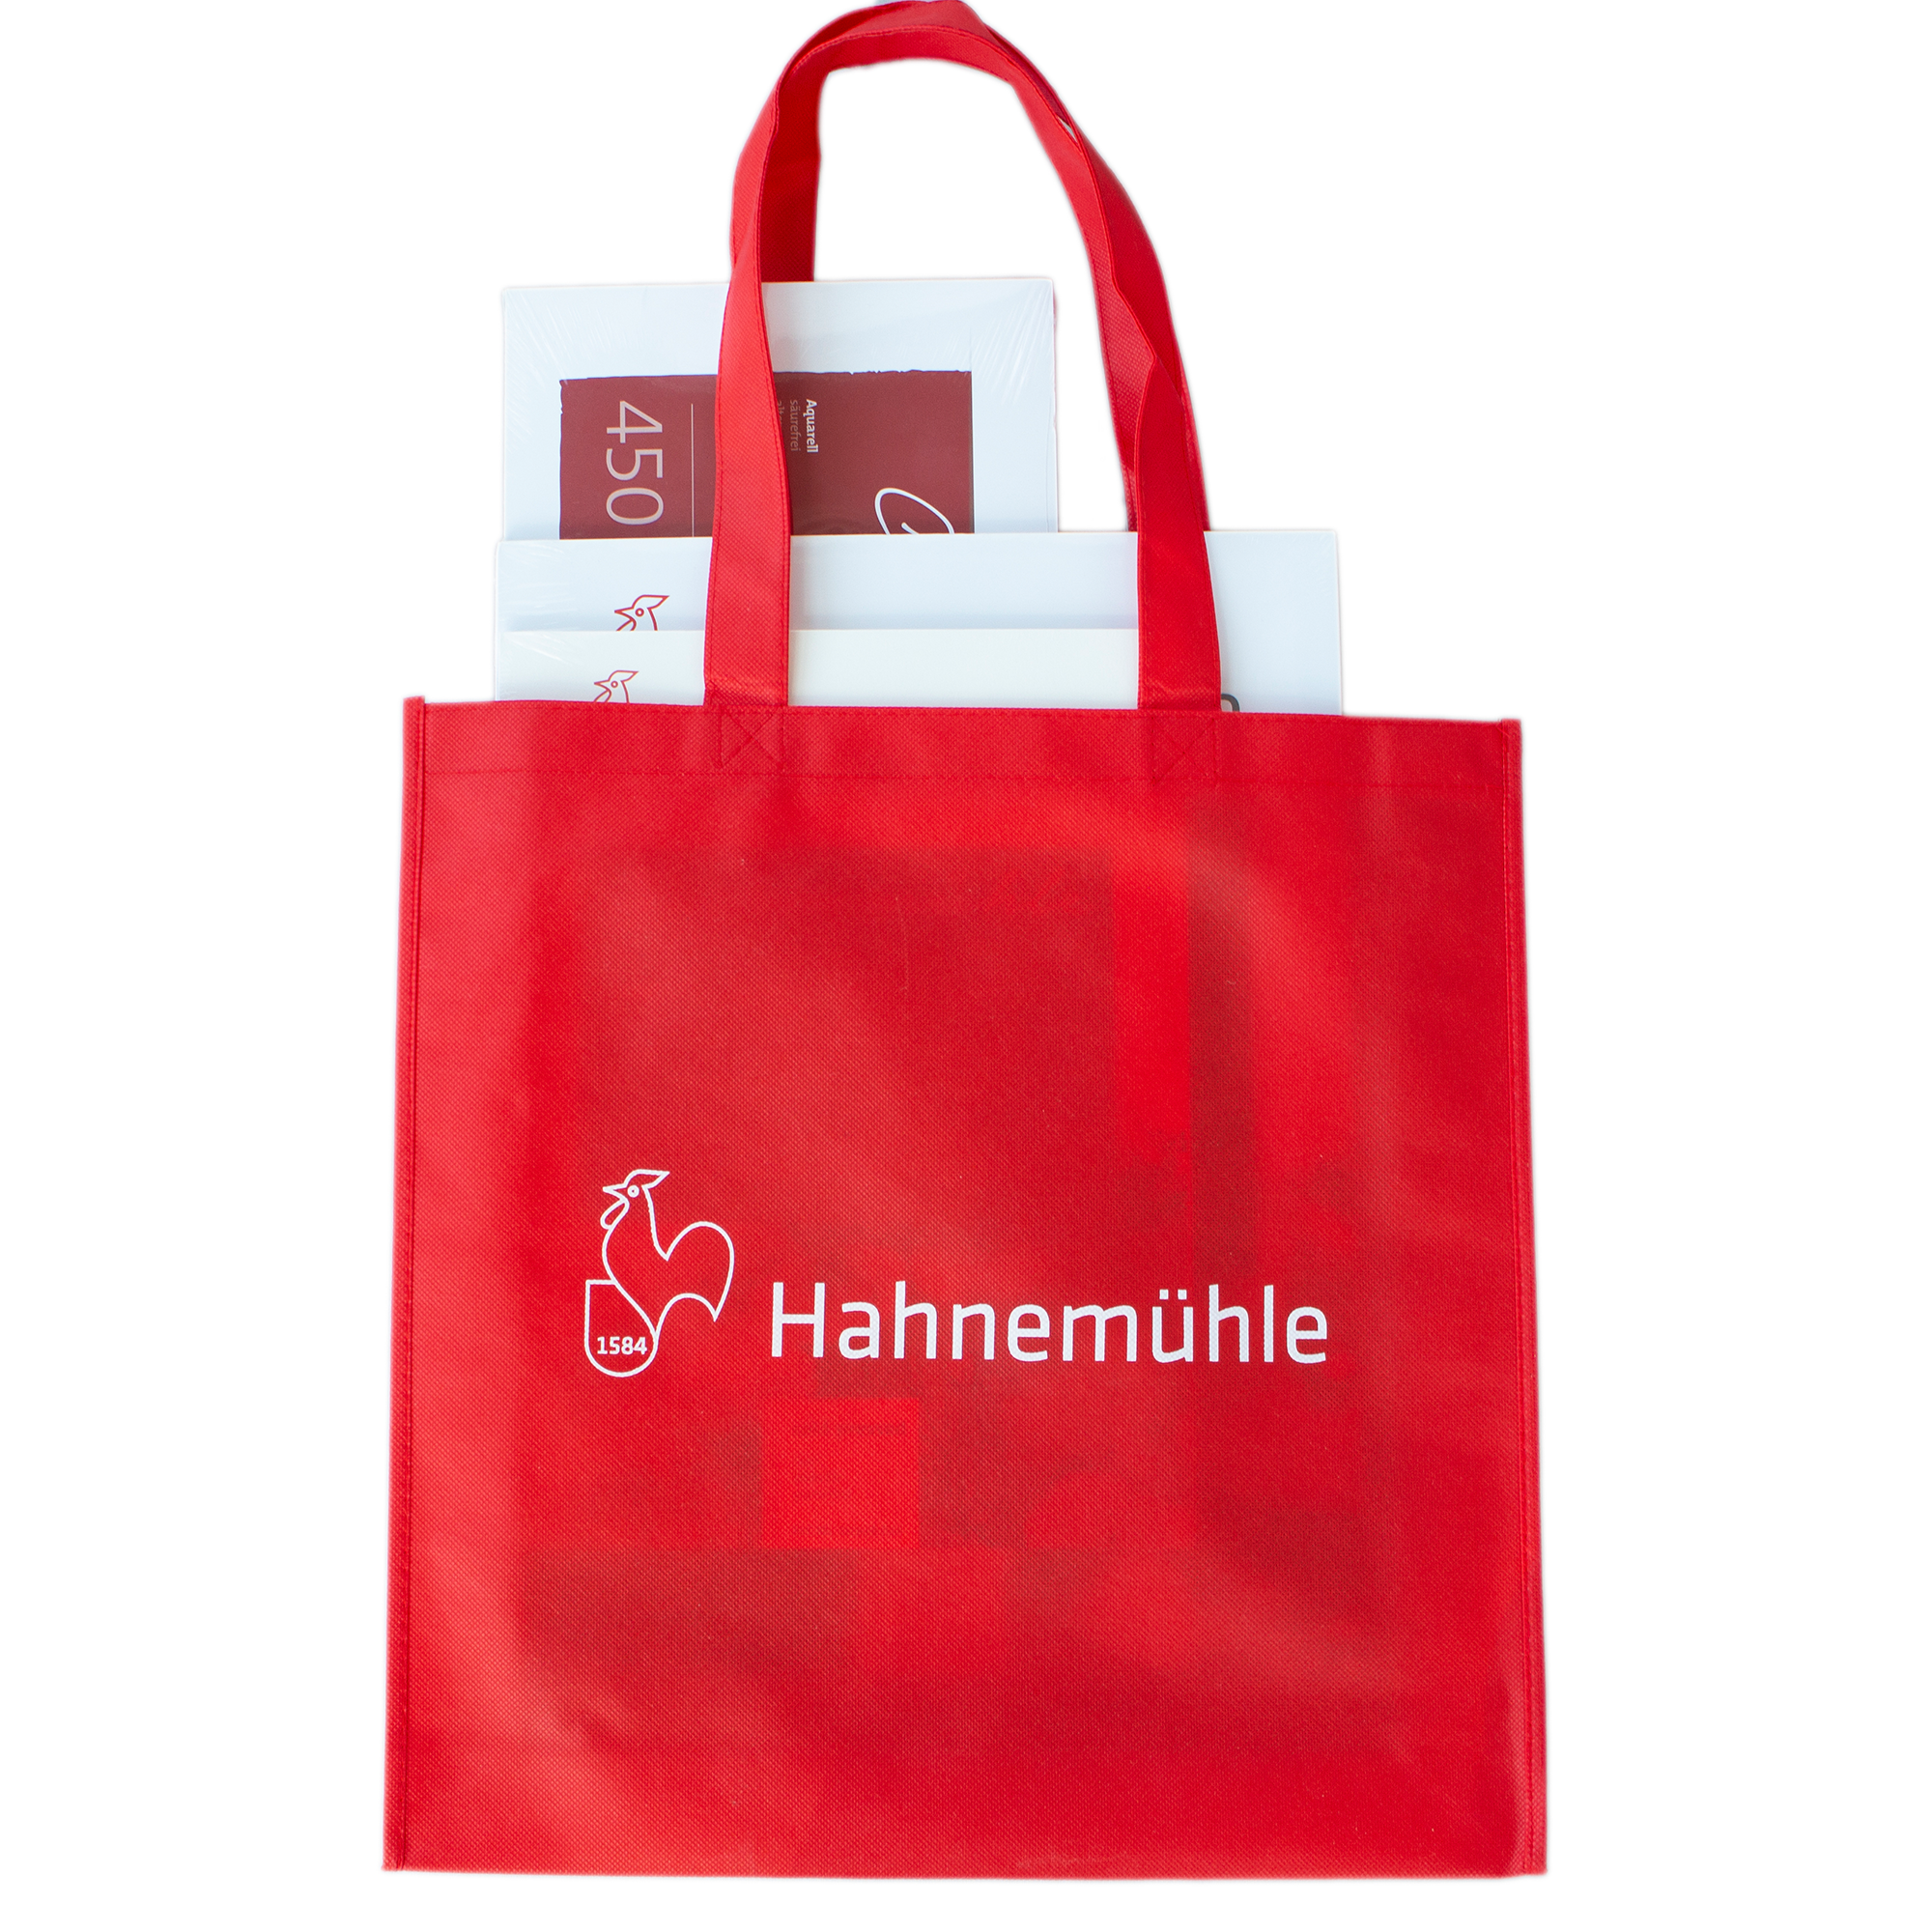 Hahnemühle Carrying bag 40 X 40 X 10cm